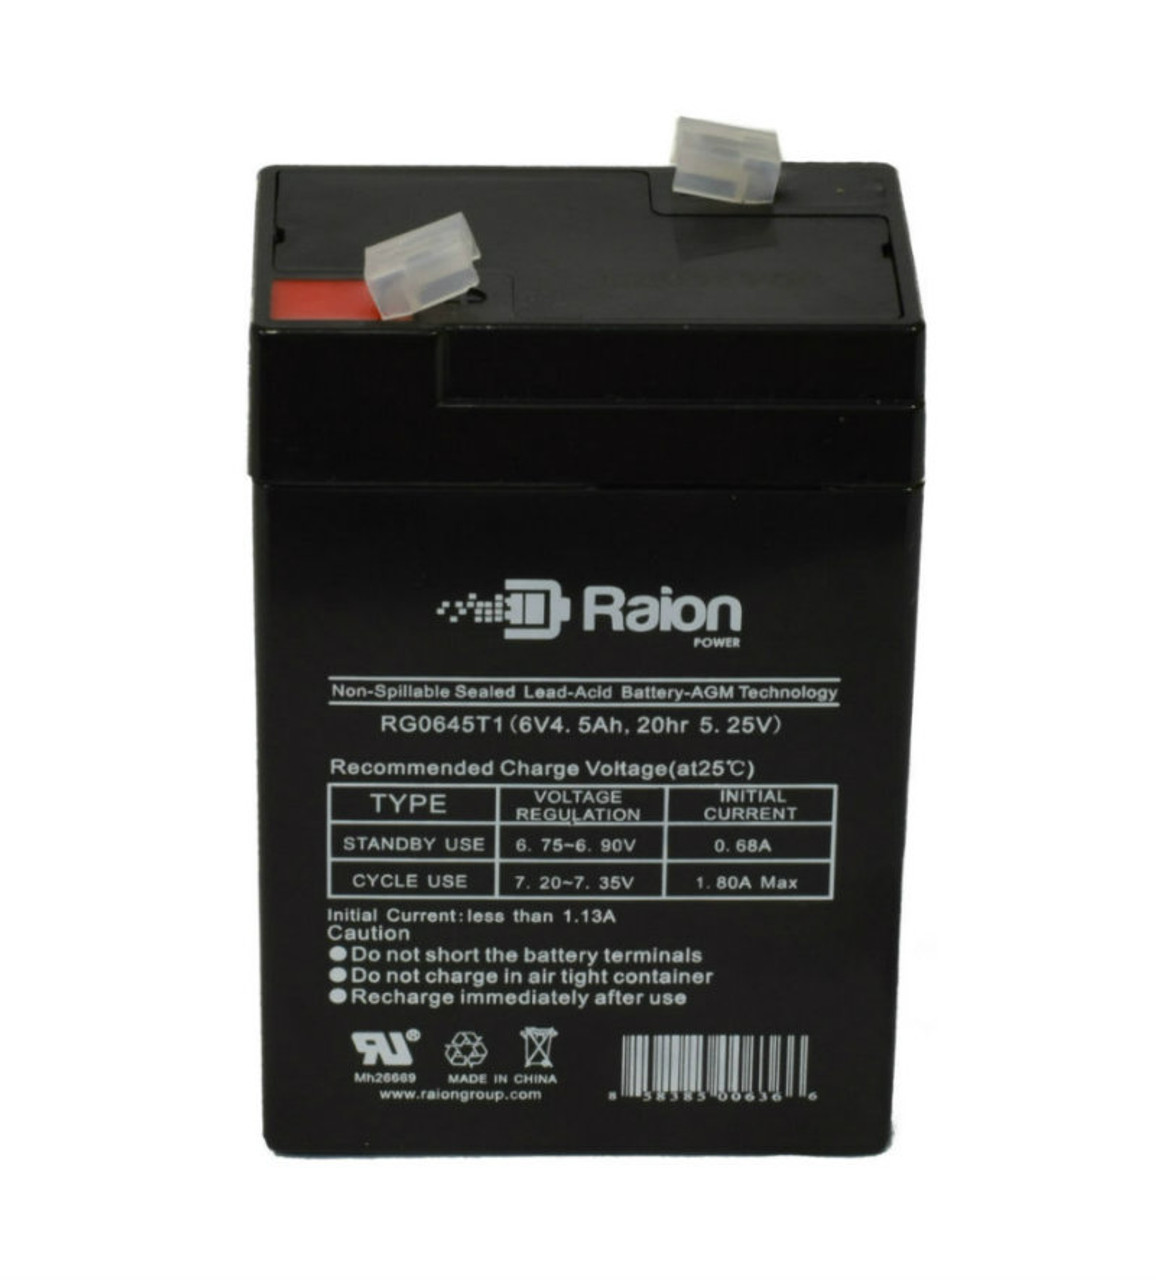 Raion Power RG0645T1 Replacement Battery Cartridge for Ritar RT650